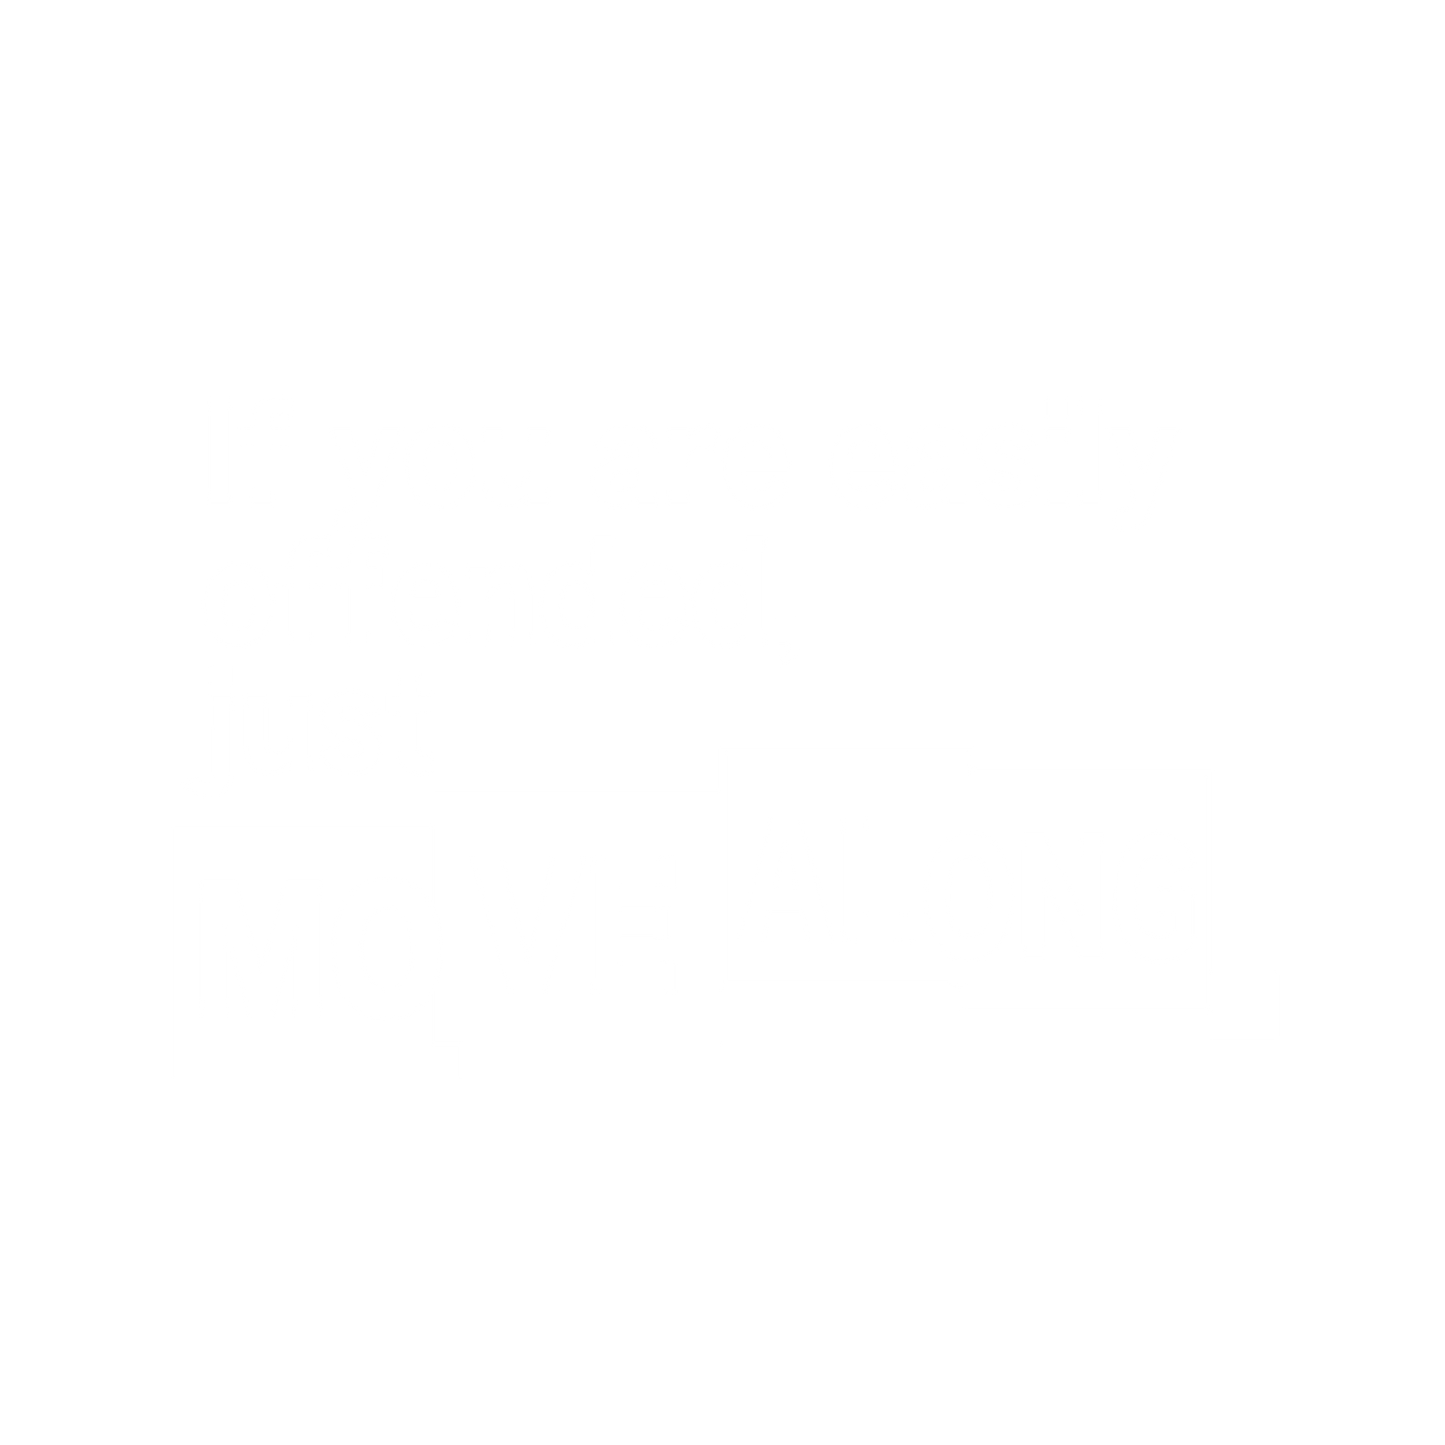 If You Are Easily Offended, Just Move Along